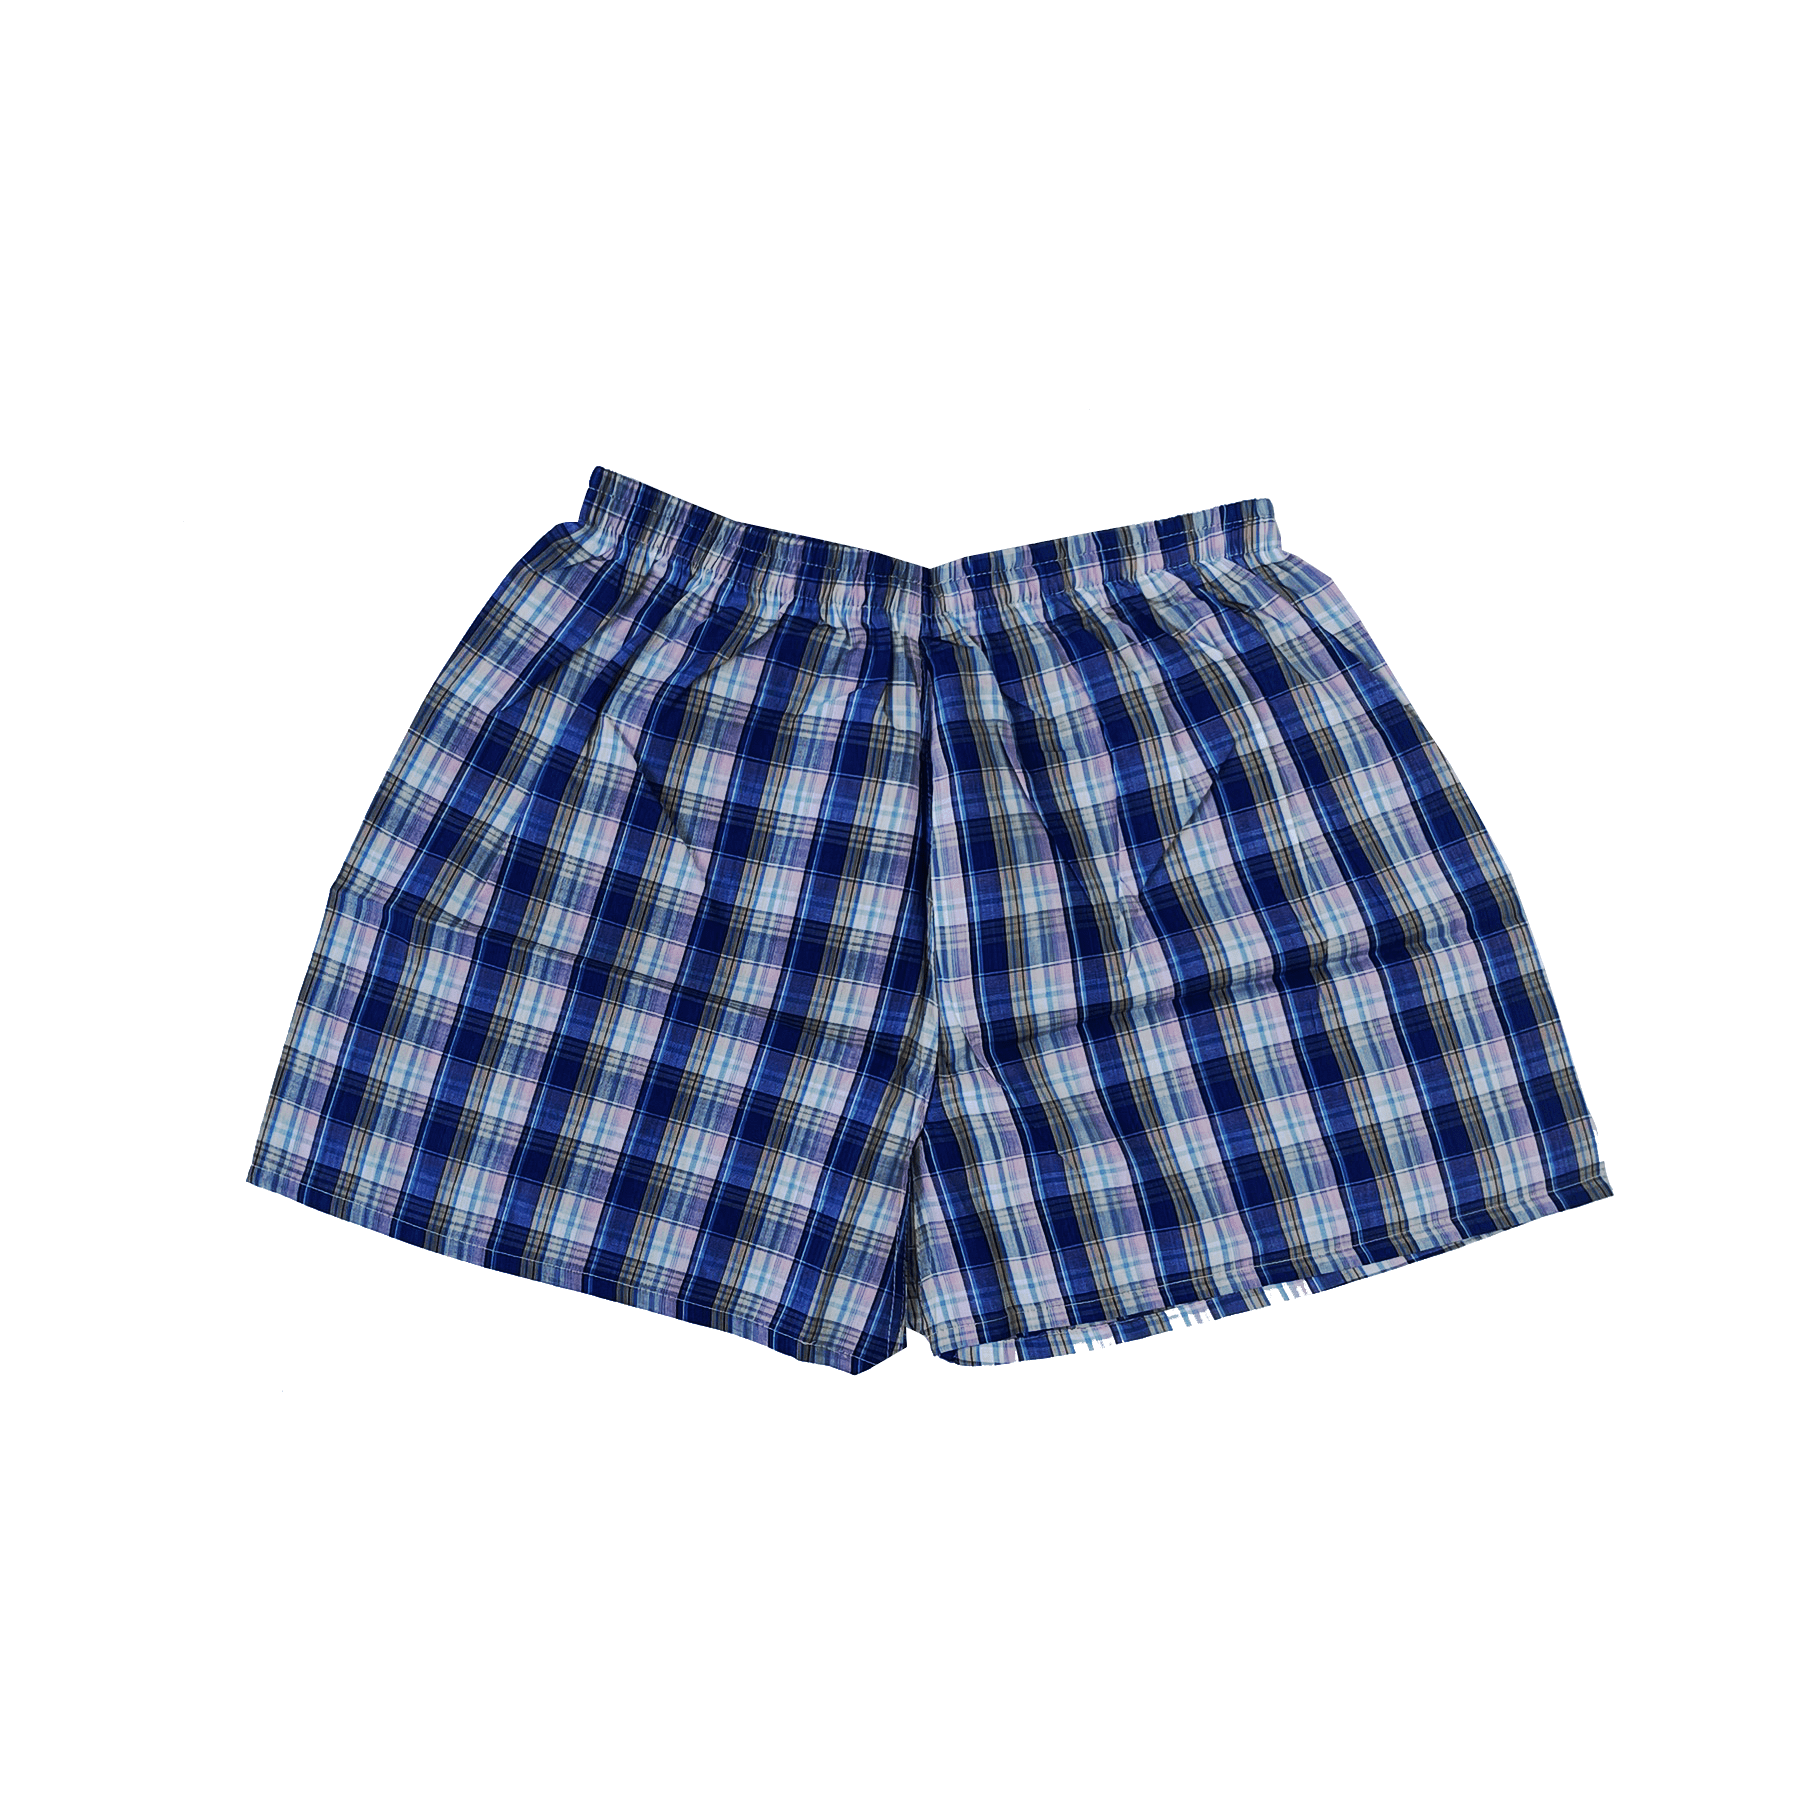 Man Short Pants Fast Delivery Quick Dry Cheap Price Oem Each One In Opp Bag Made In Vietnam Manufacturer